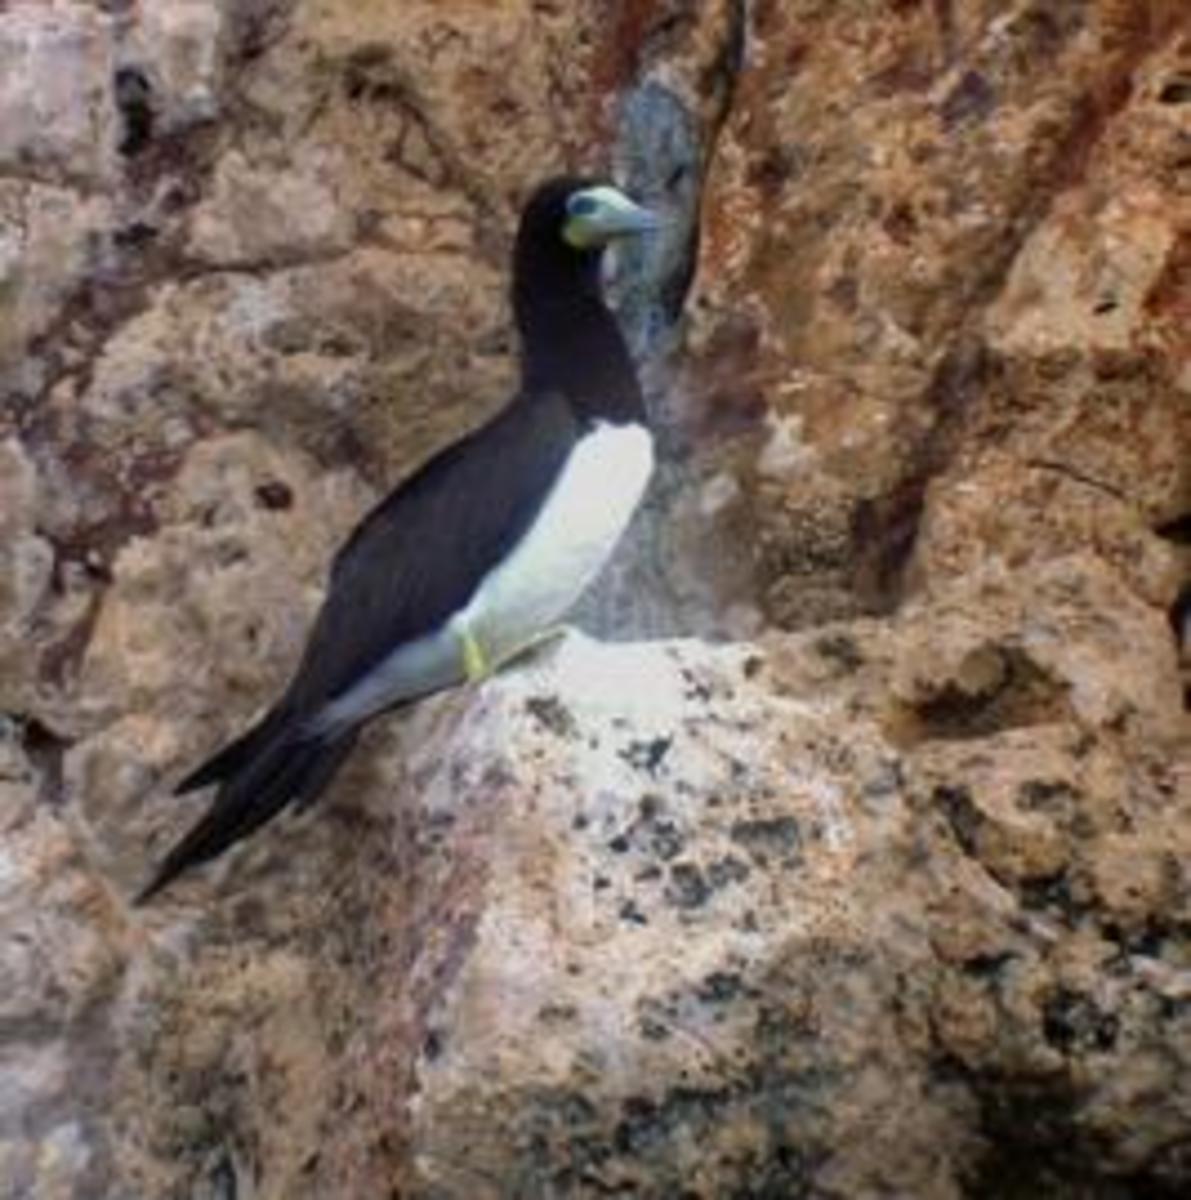 The Guano Islands Act of 1856 - Congress's Bird Poop Law